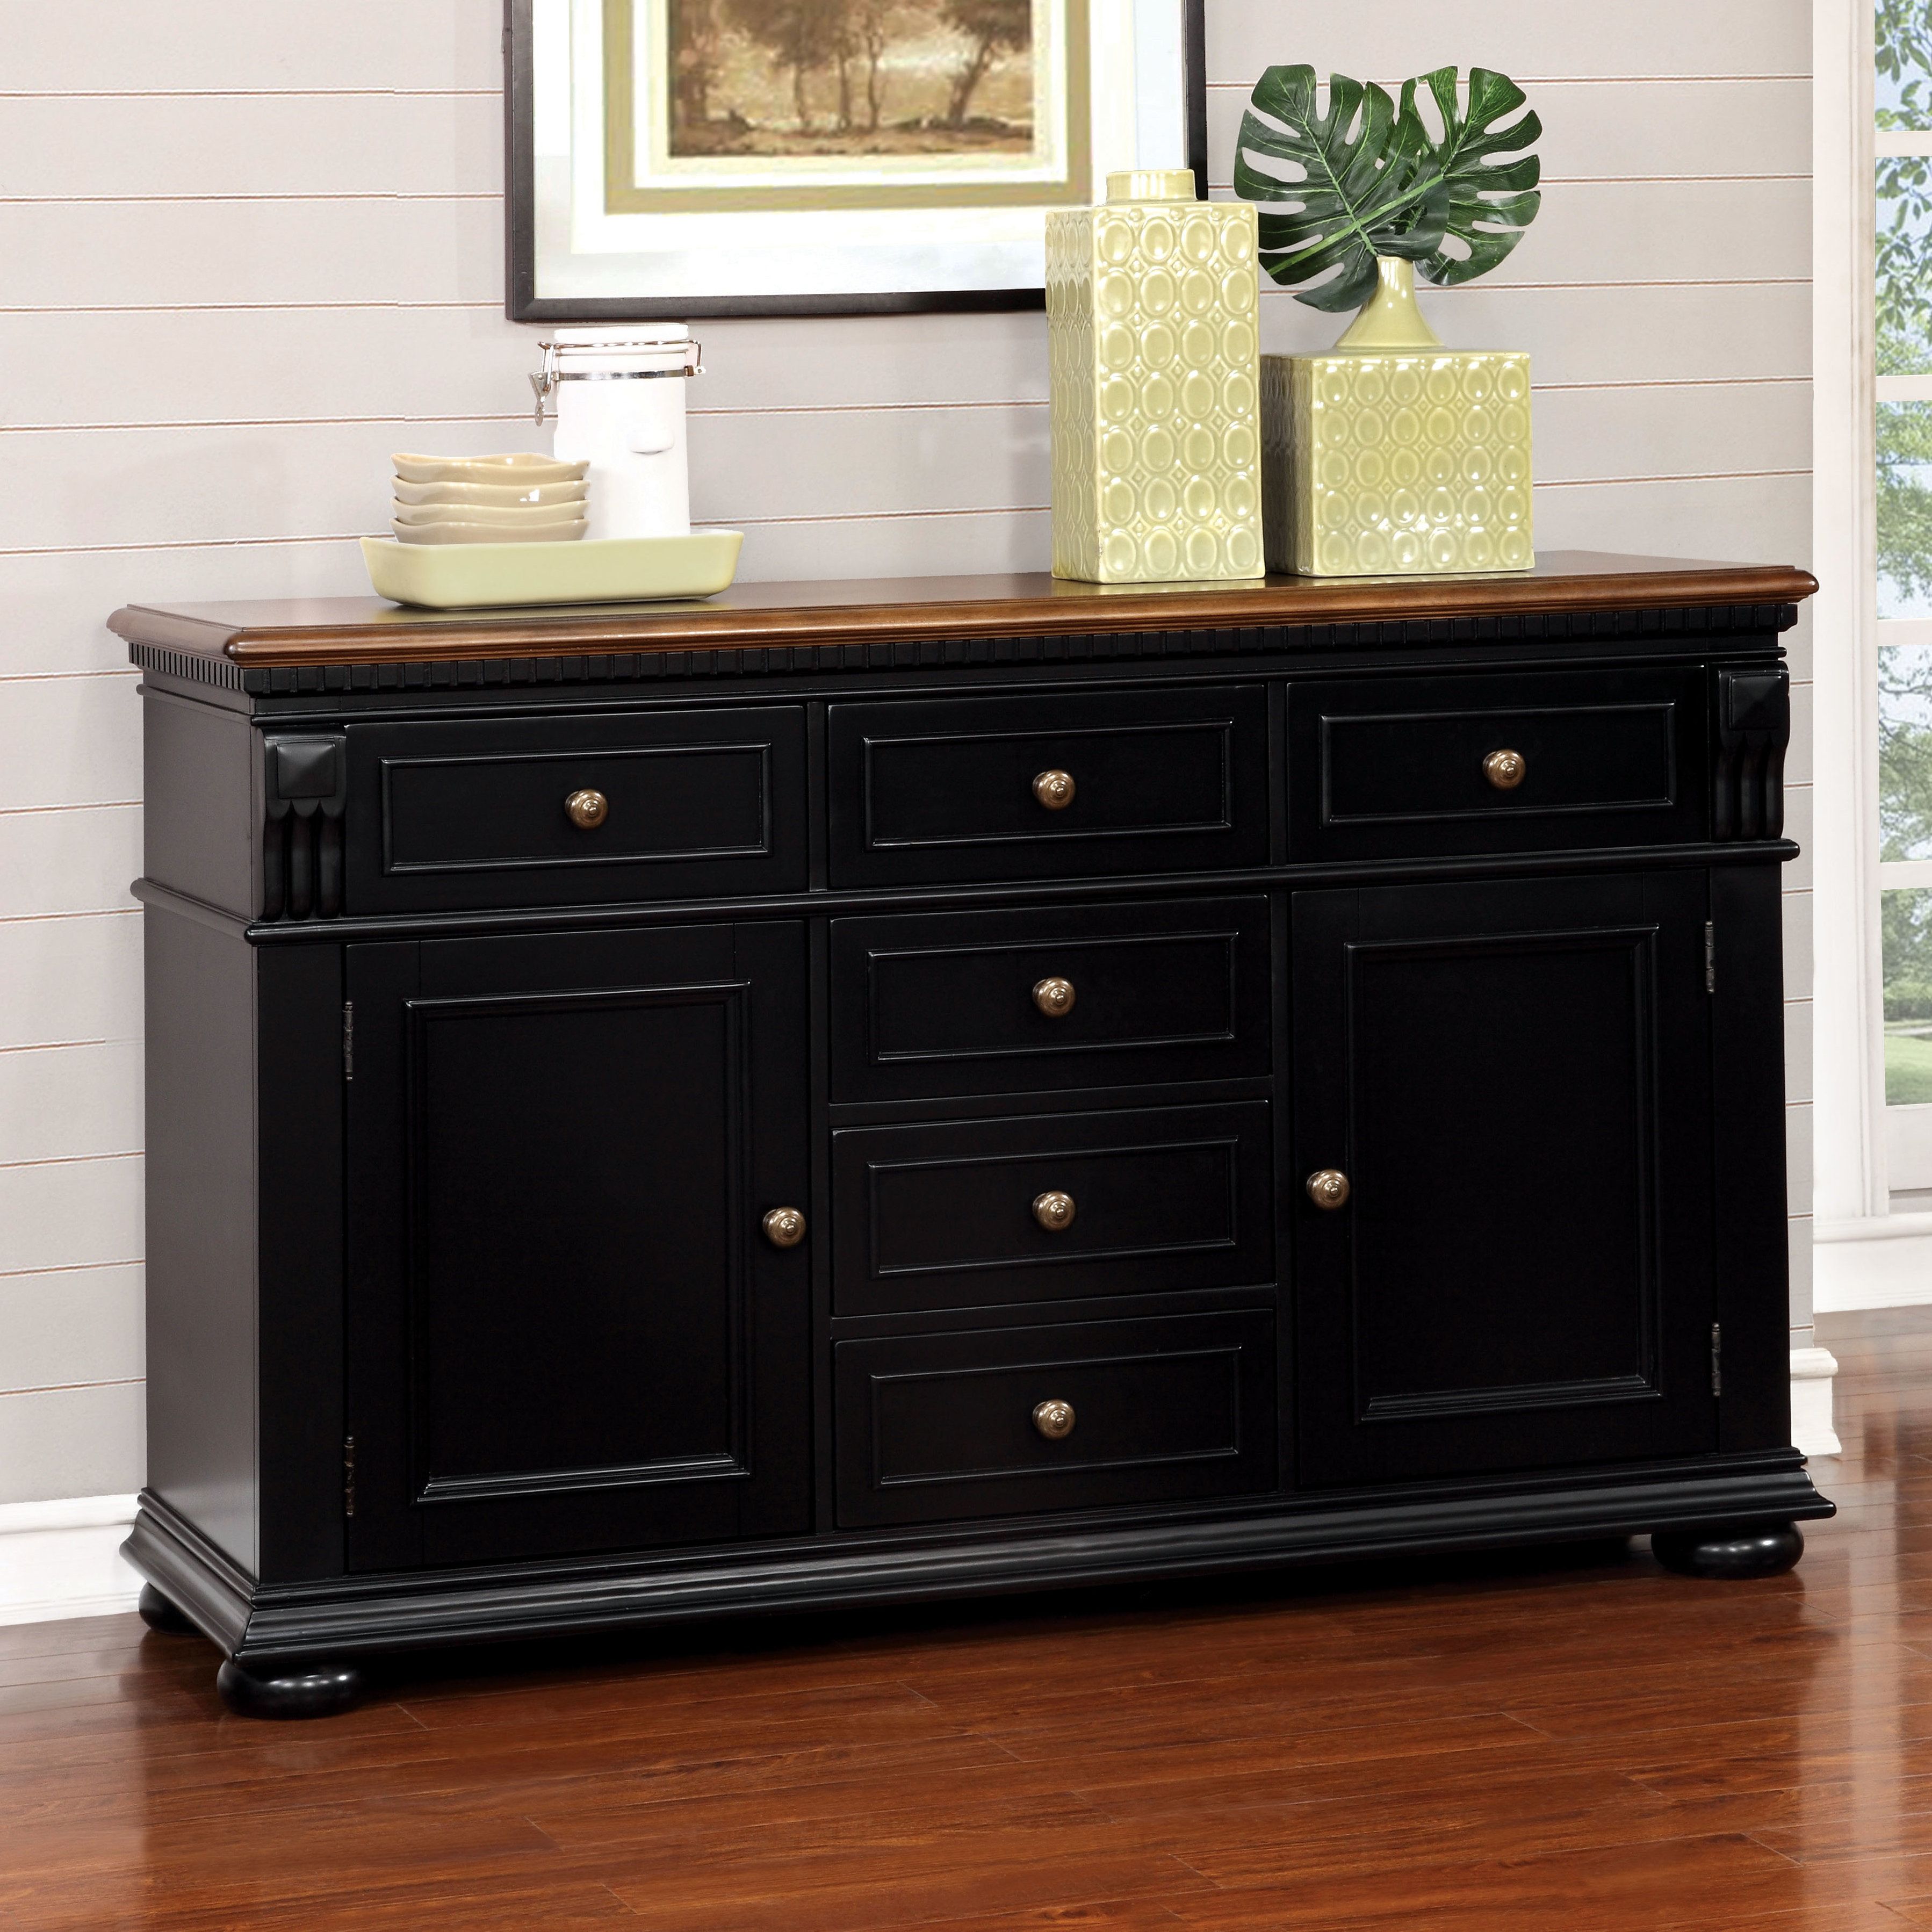 Veasley Sideboard Regarding Most Up To Date Payton Serving Sideboards (View 16 of 20)